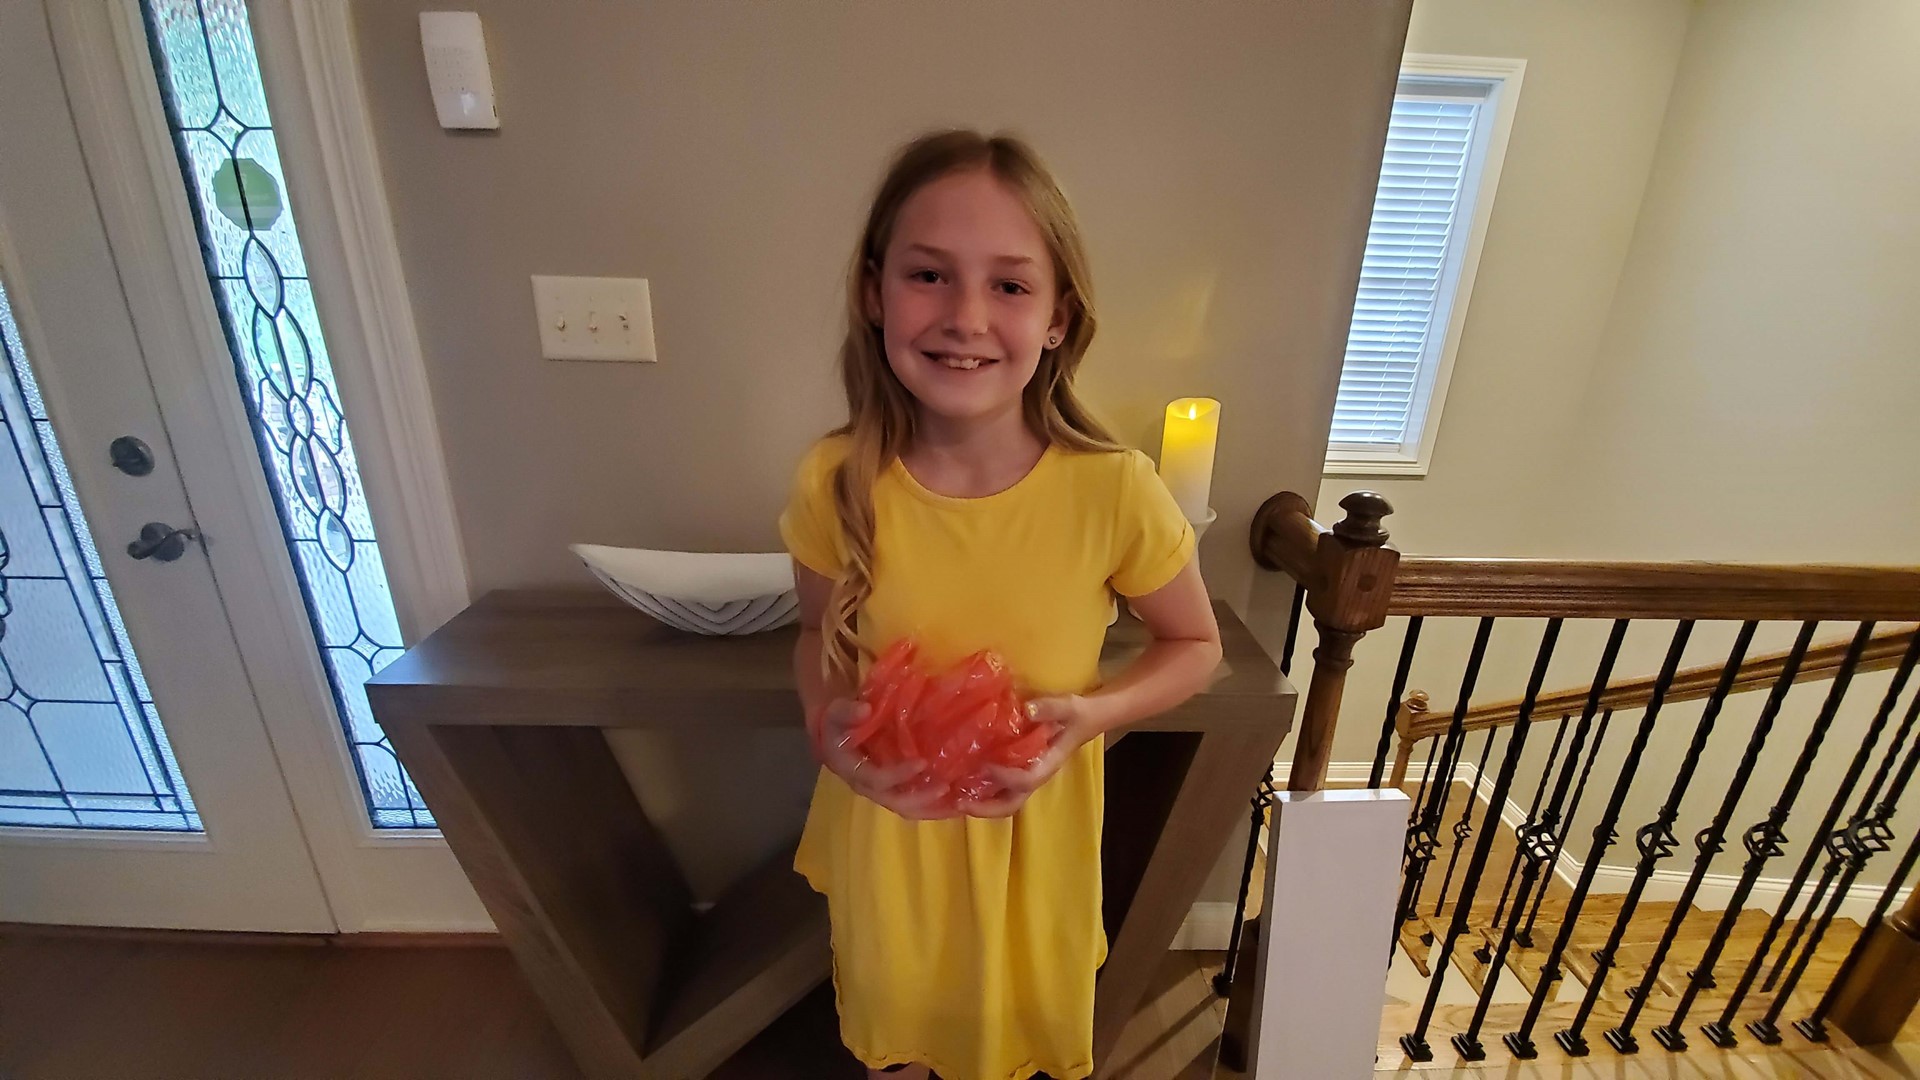 11-year-old Brenleigh Birkemeier talks about her Remind Me bracelets that she's selling to raise money for Blessings in a Backpack. Go to RemindMeRed.com.